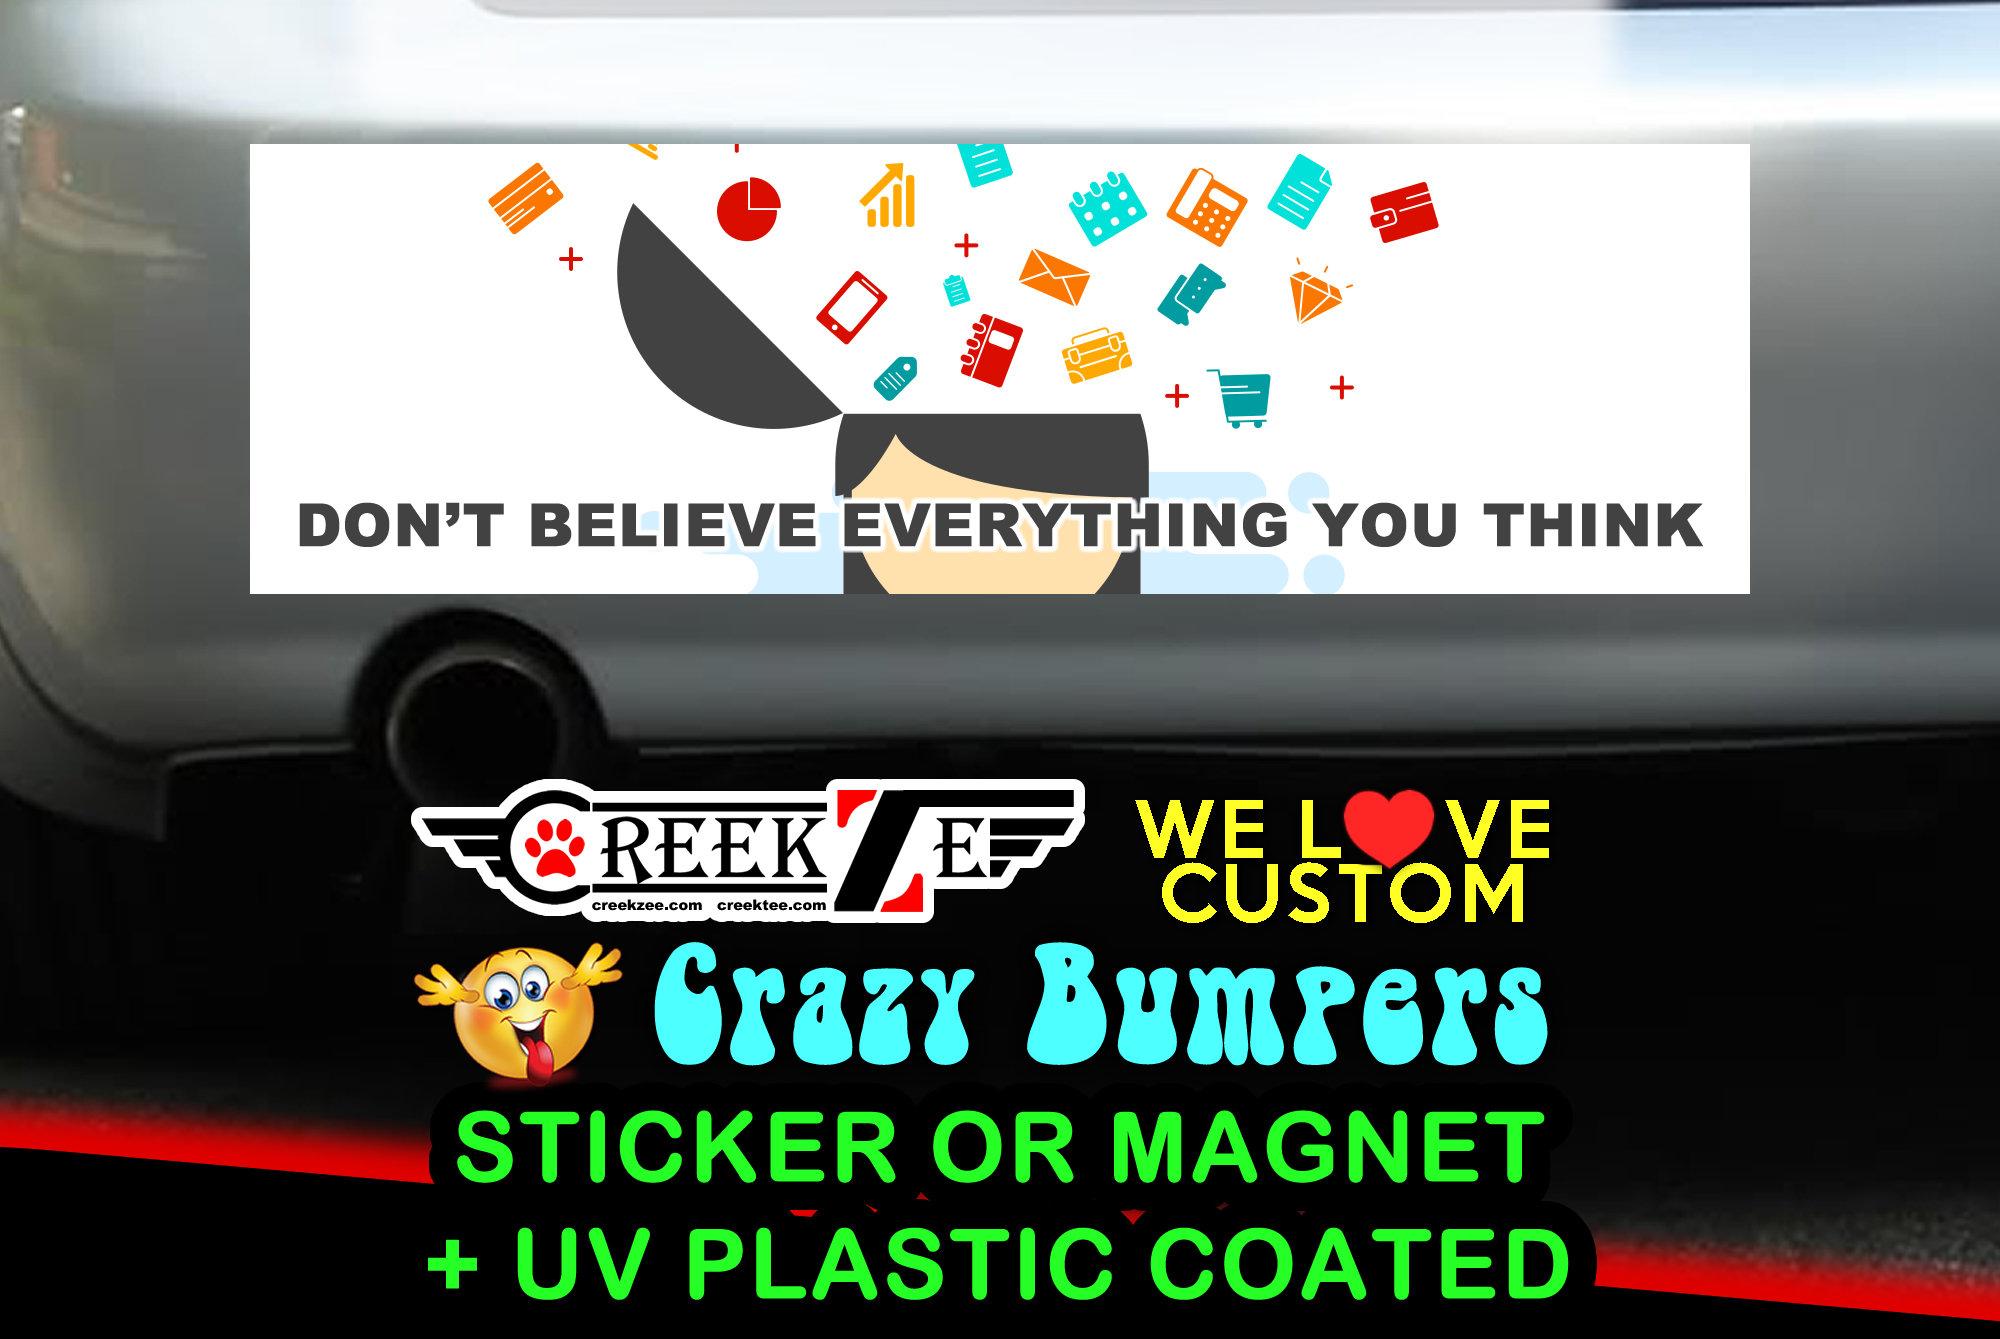 Don't Believe Everything You Think Bumper Sticker or Magnet, various sizes available with UV laminate protection